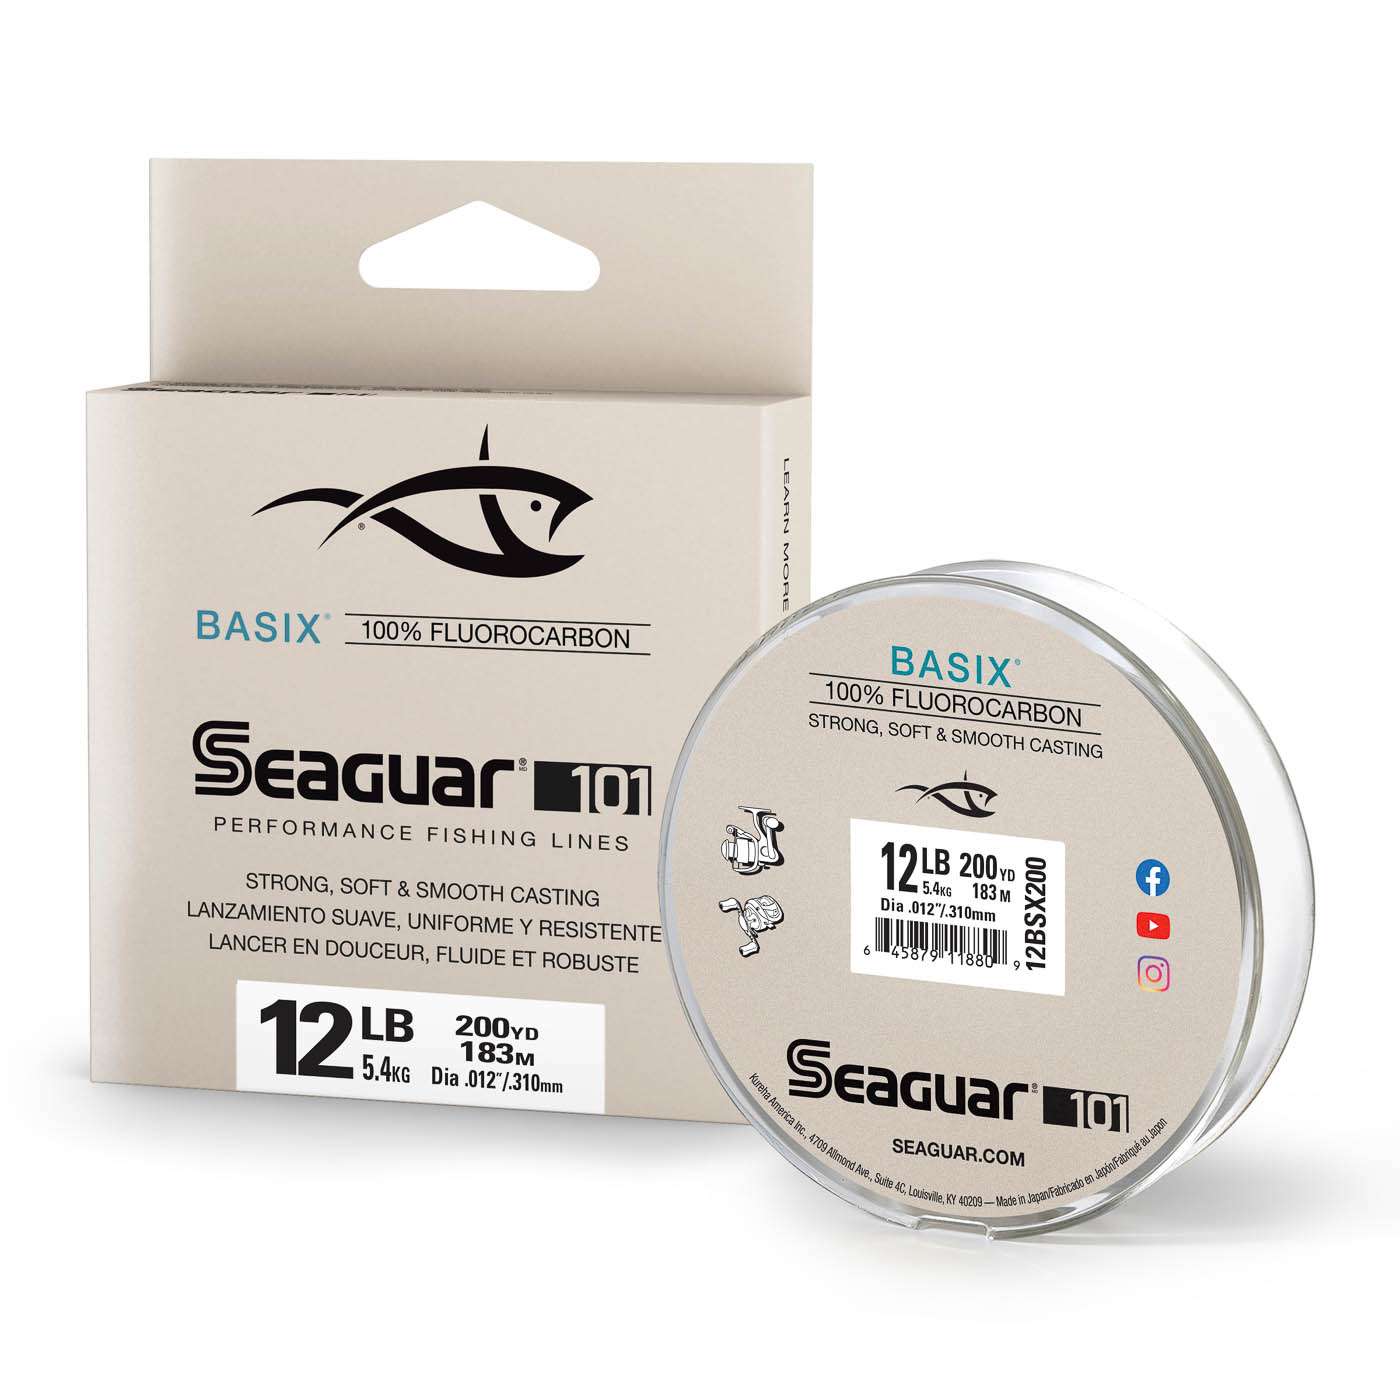 <p><strong>Seaguar BasiX</strong></p><p>BasiX is a new mainline that delivers all the benefits of 100% fluorocarbon at a value price. BasiX is made from 100% custom Seaguar fluorocarbon resins. That makes it virtually invisible underwater, while boasting the kind of knot strength and abrasion resistance anglers expect from Seaguar. This is a soft, supple, easy-casting line that comes off a reel smoothly for a fret-free fishing experience. $9.99. <a href=